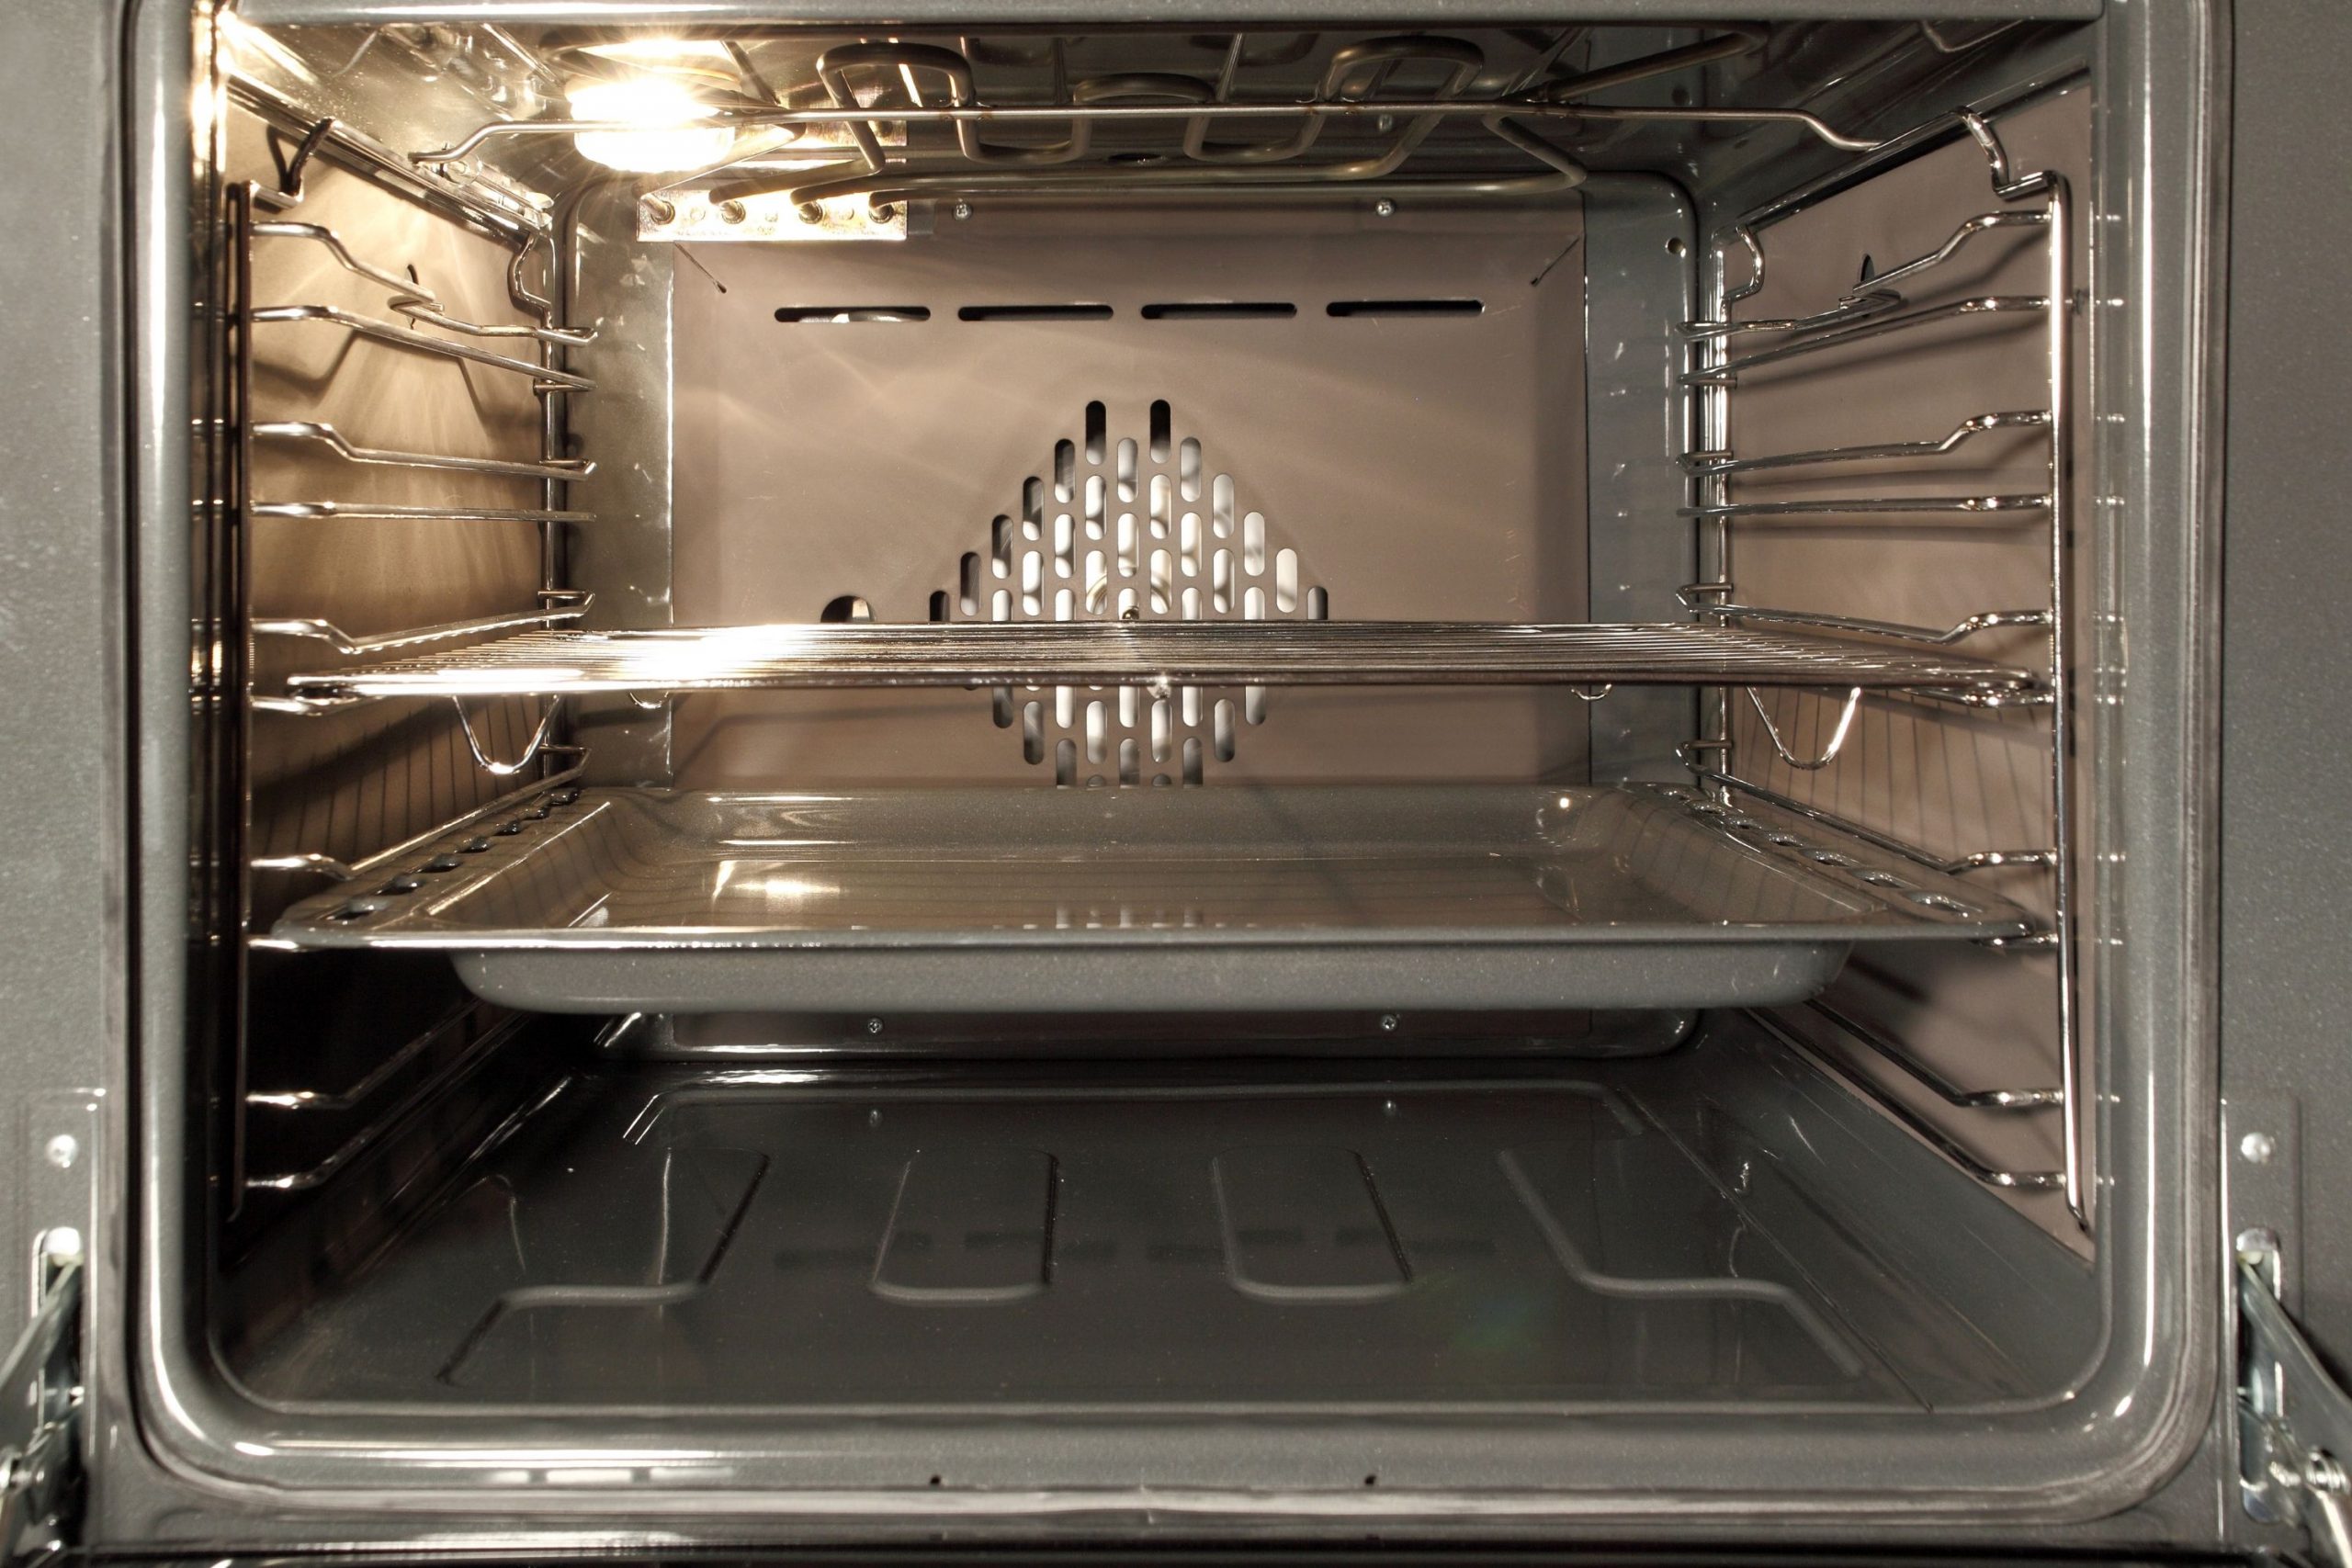 Is Your Oven Making Popping Noise That Might Be Electrical Issues